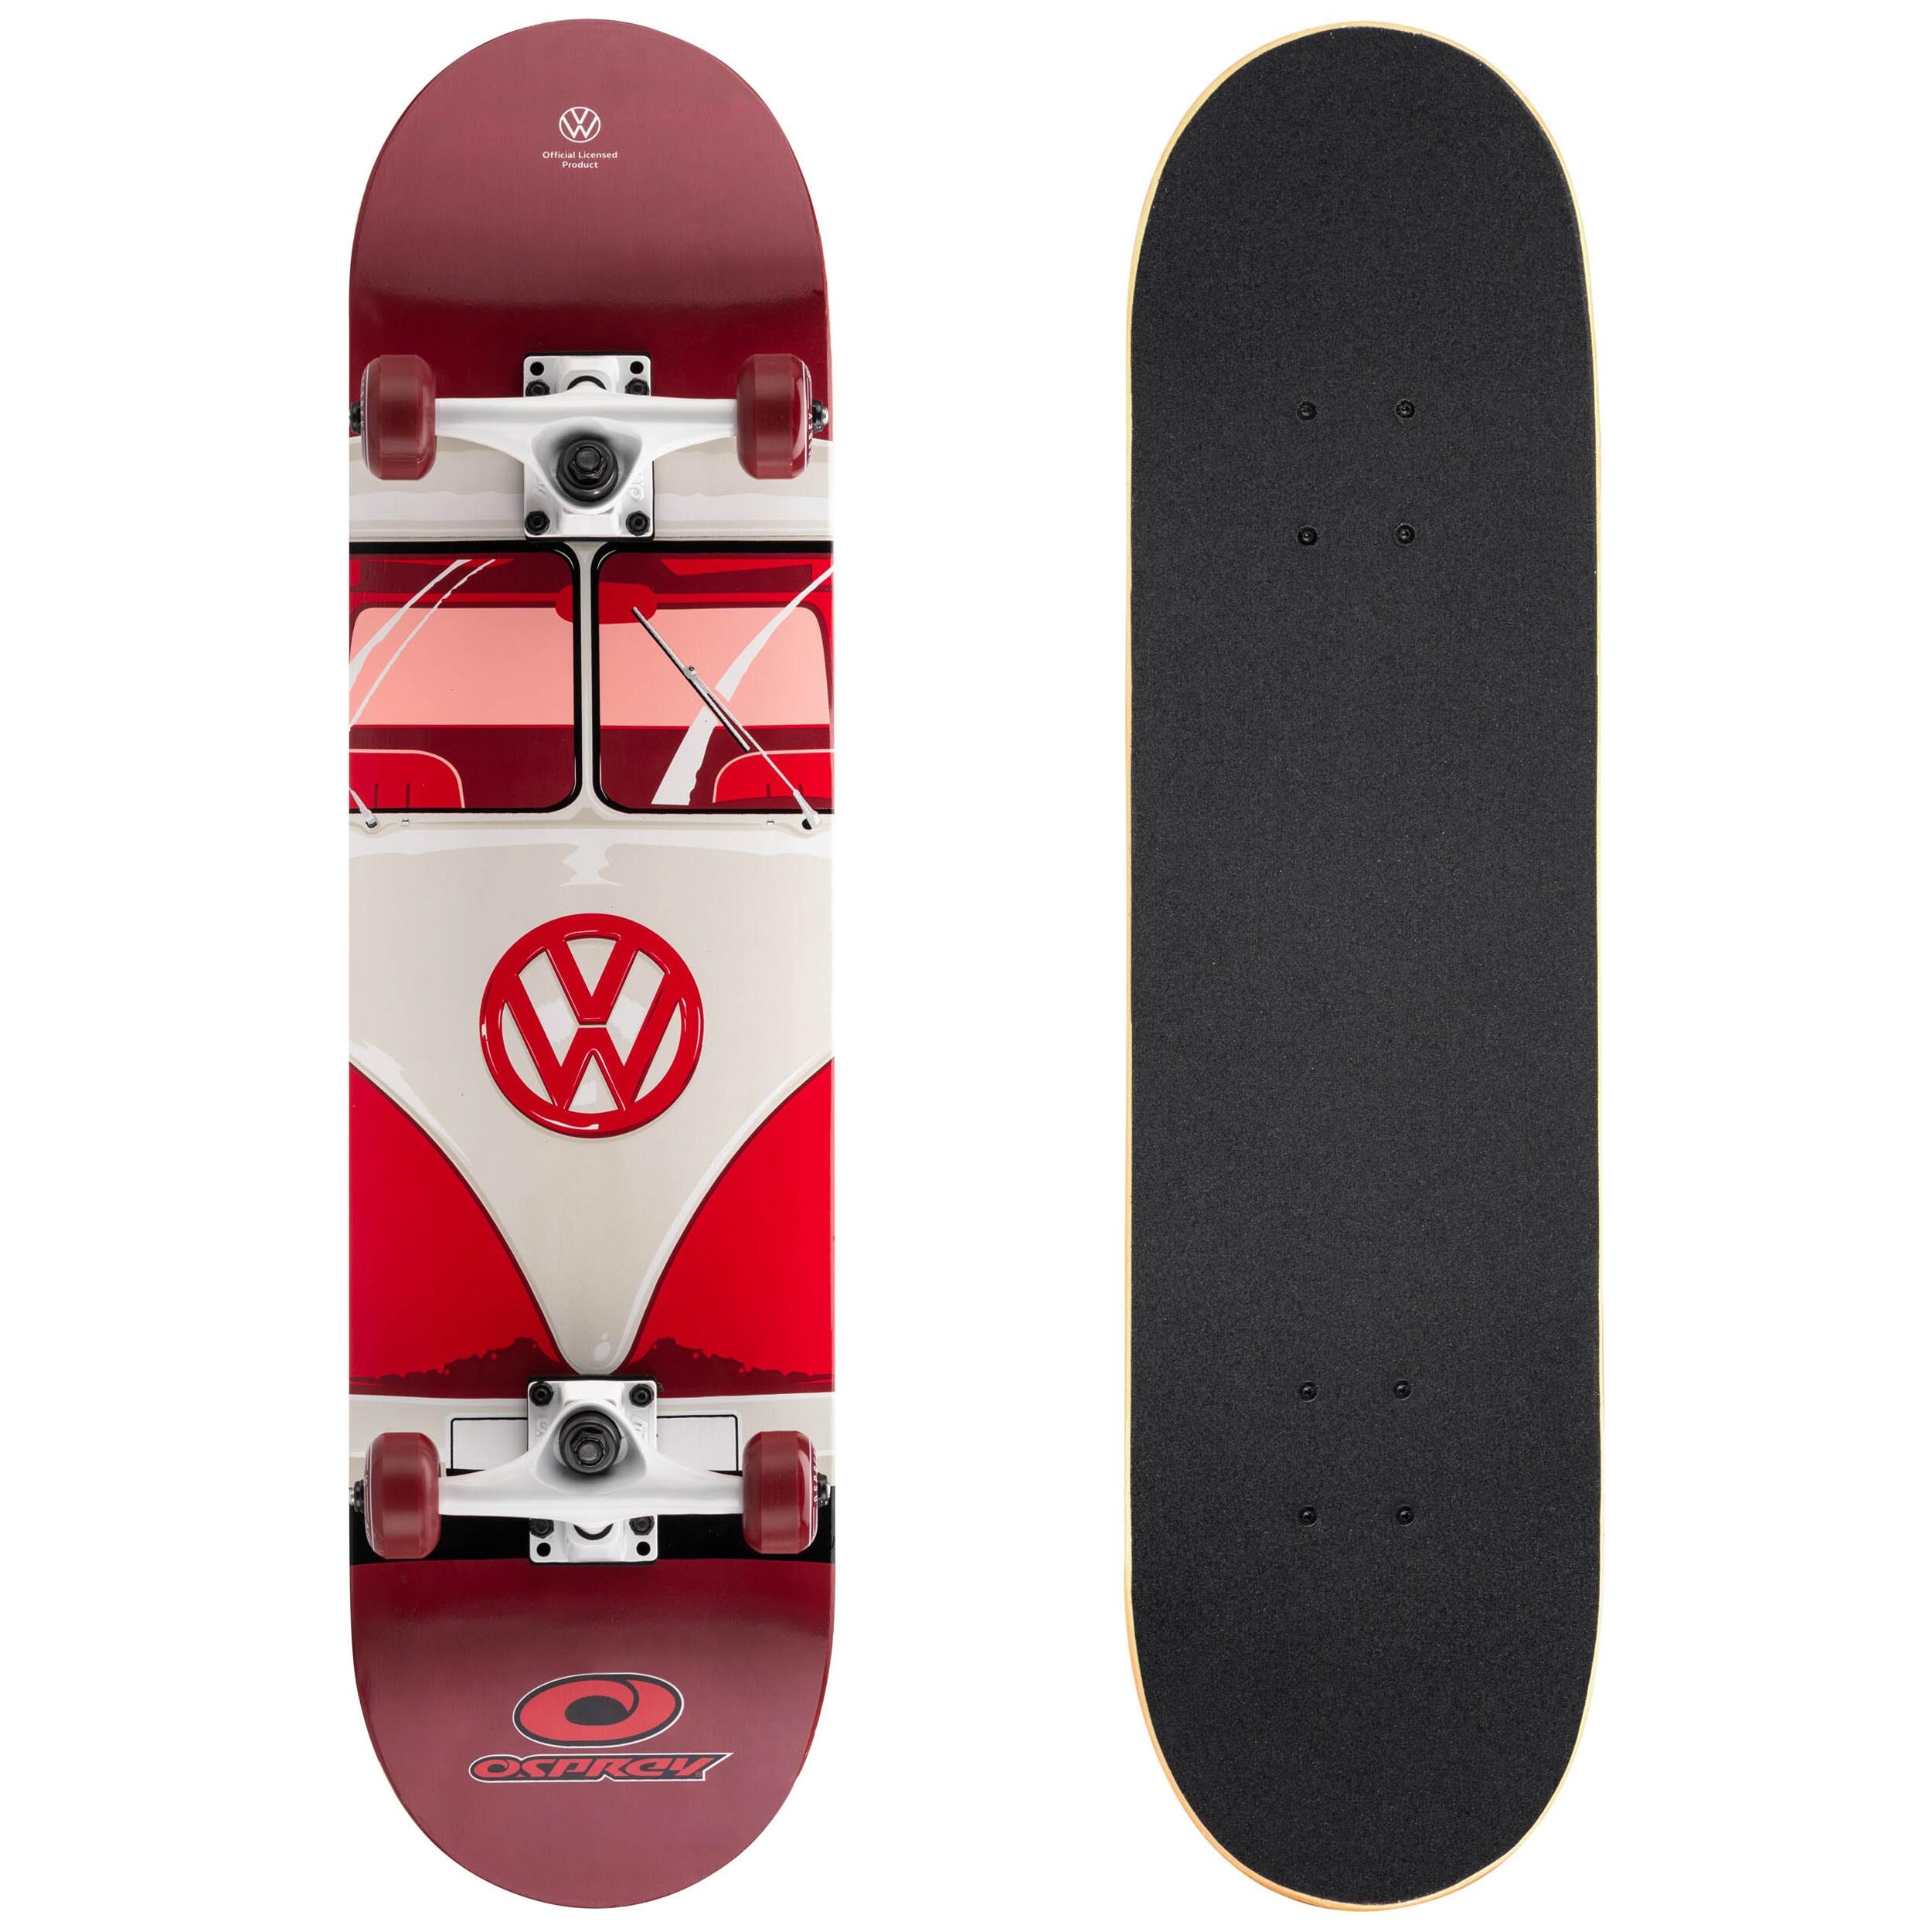 OSPREY ACTION SPORTS VW Complete Double Kick Skateboard, Maple Concave Deck 1 and Only